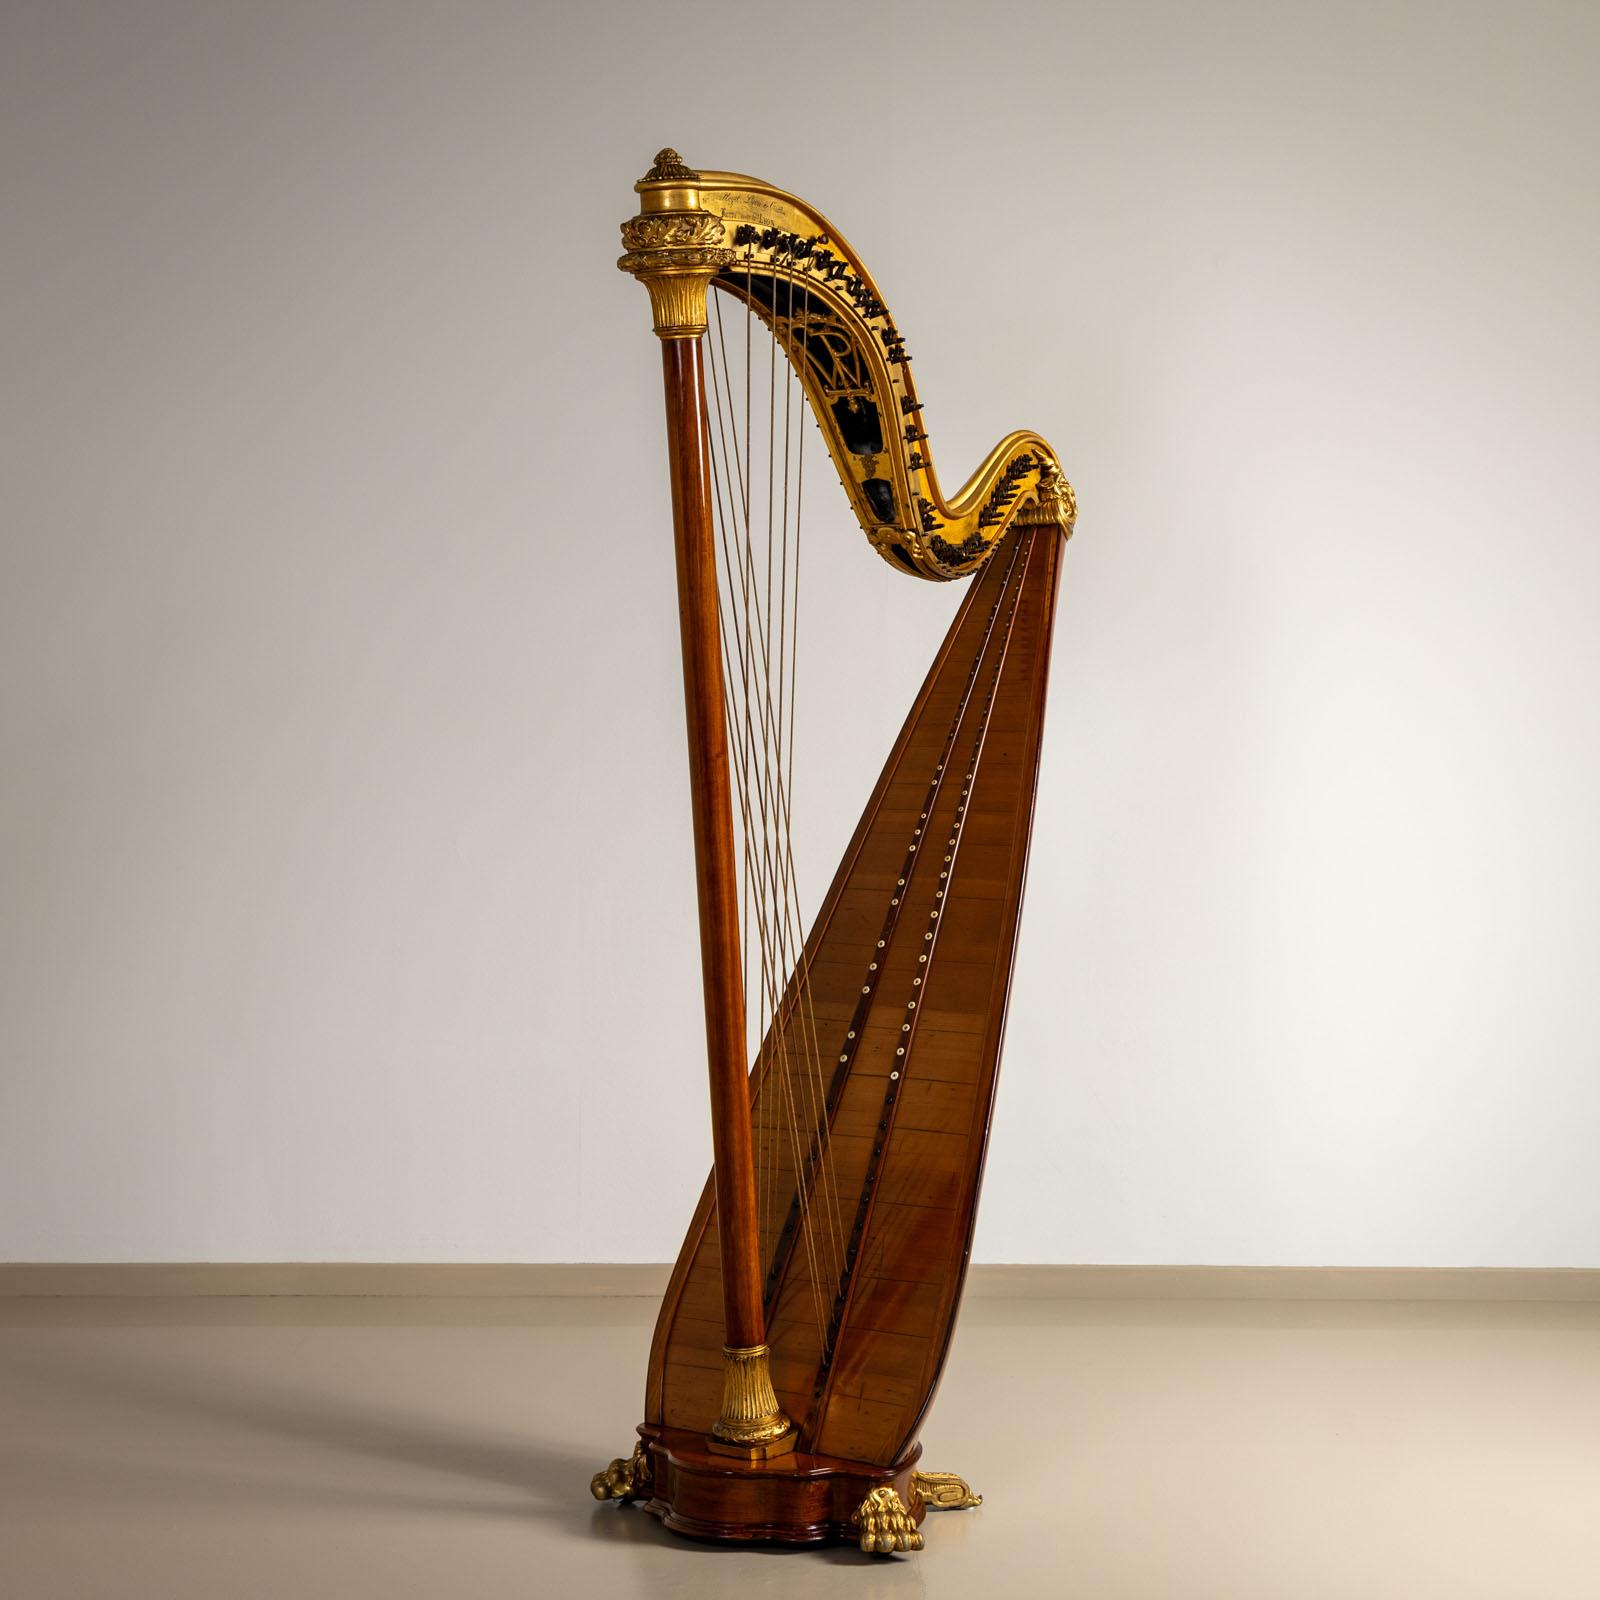 Large double harp with gold-patinated head and neck and carved paw feet on the base. The harp is marked on the neck 